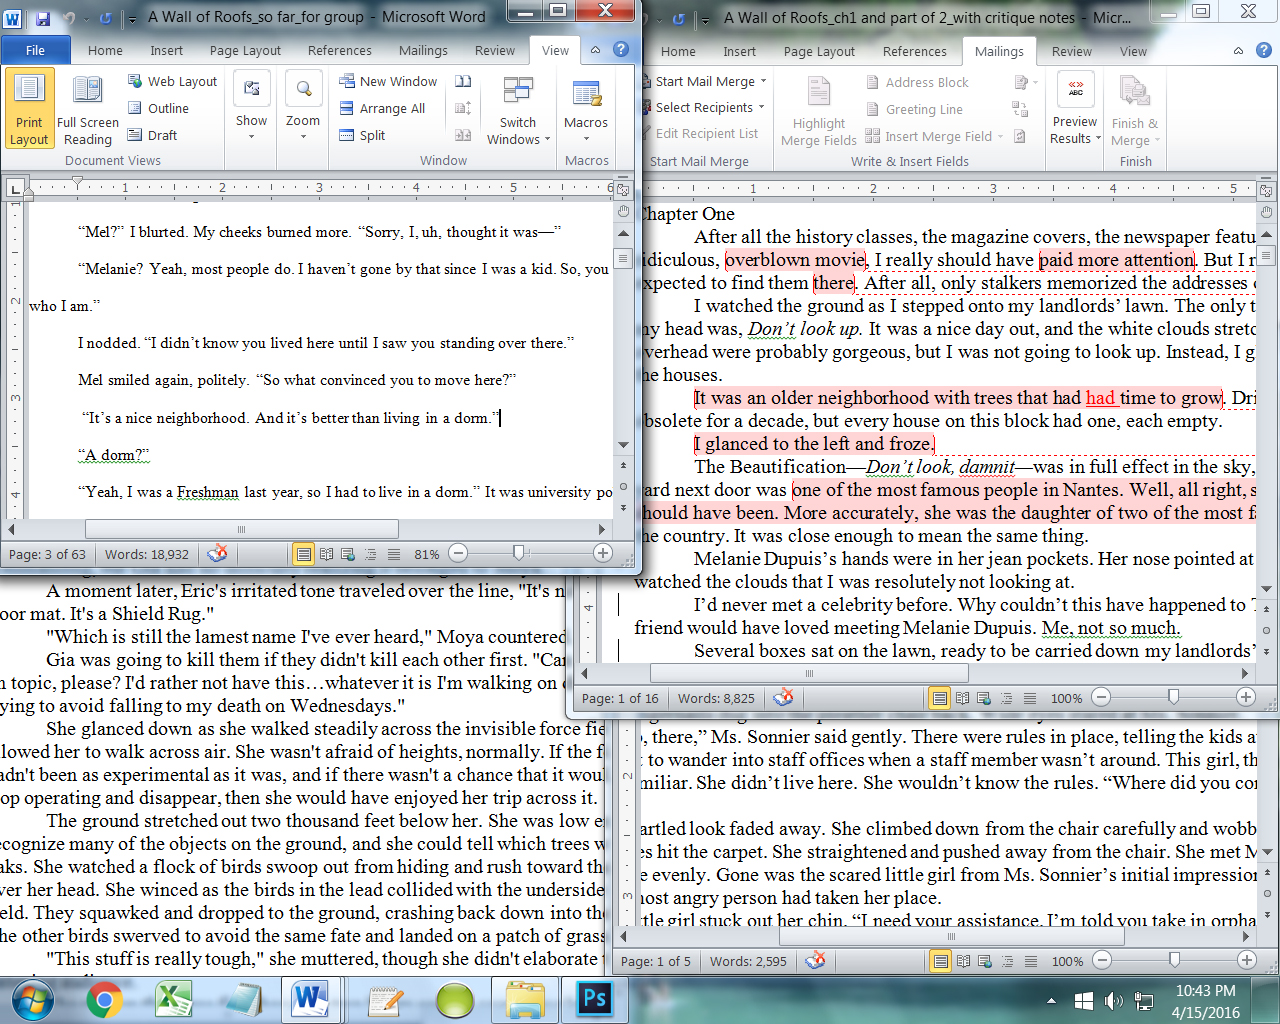 screen capture of several windows in Word showing typed material